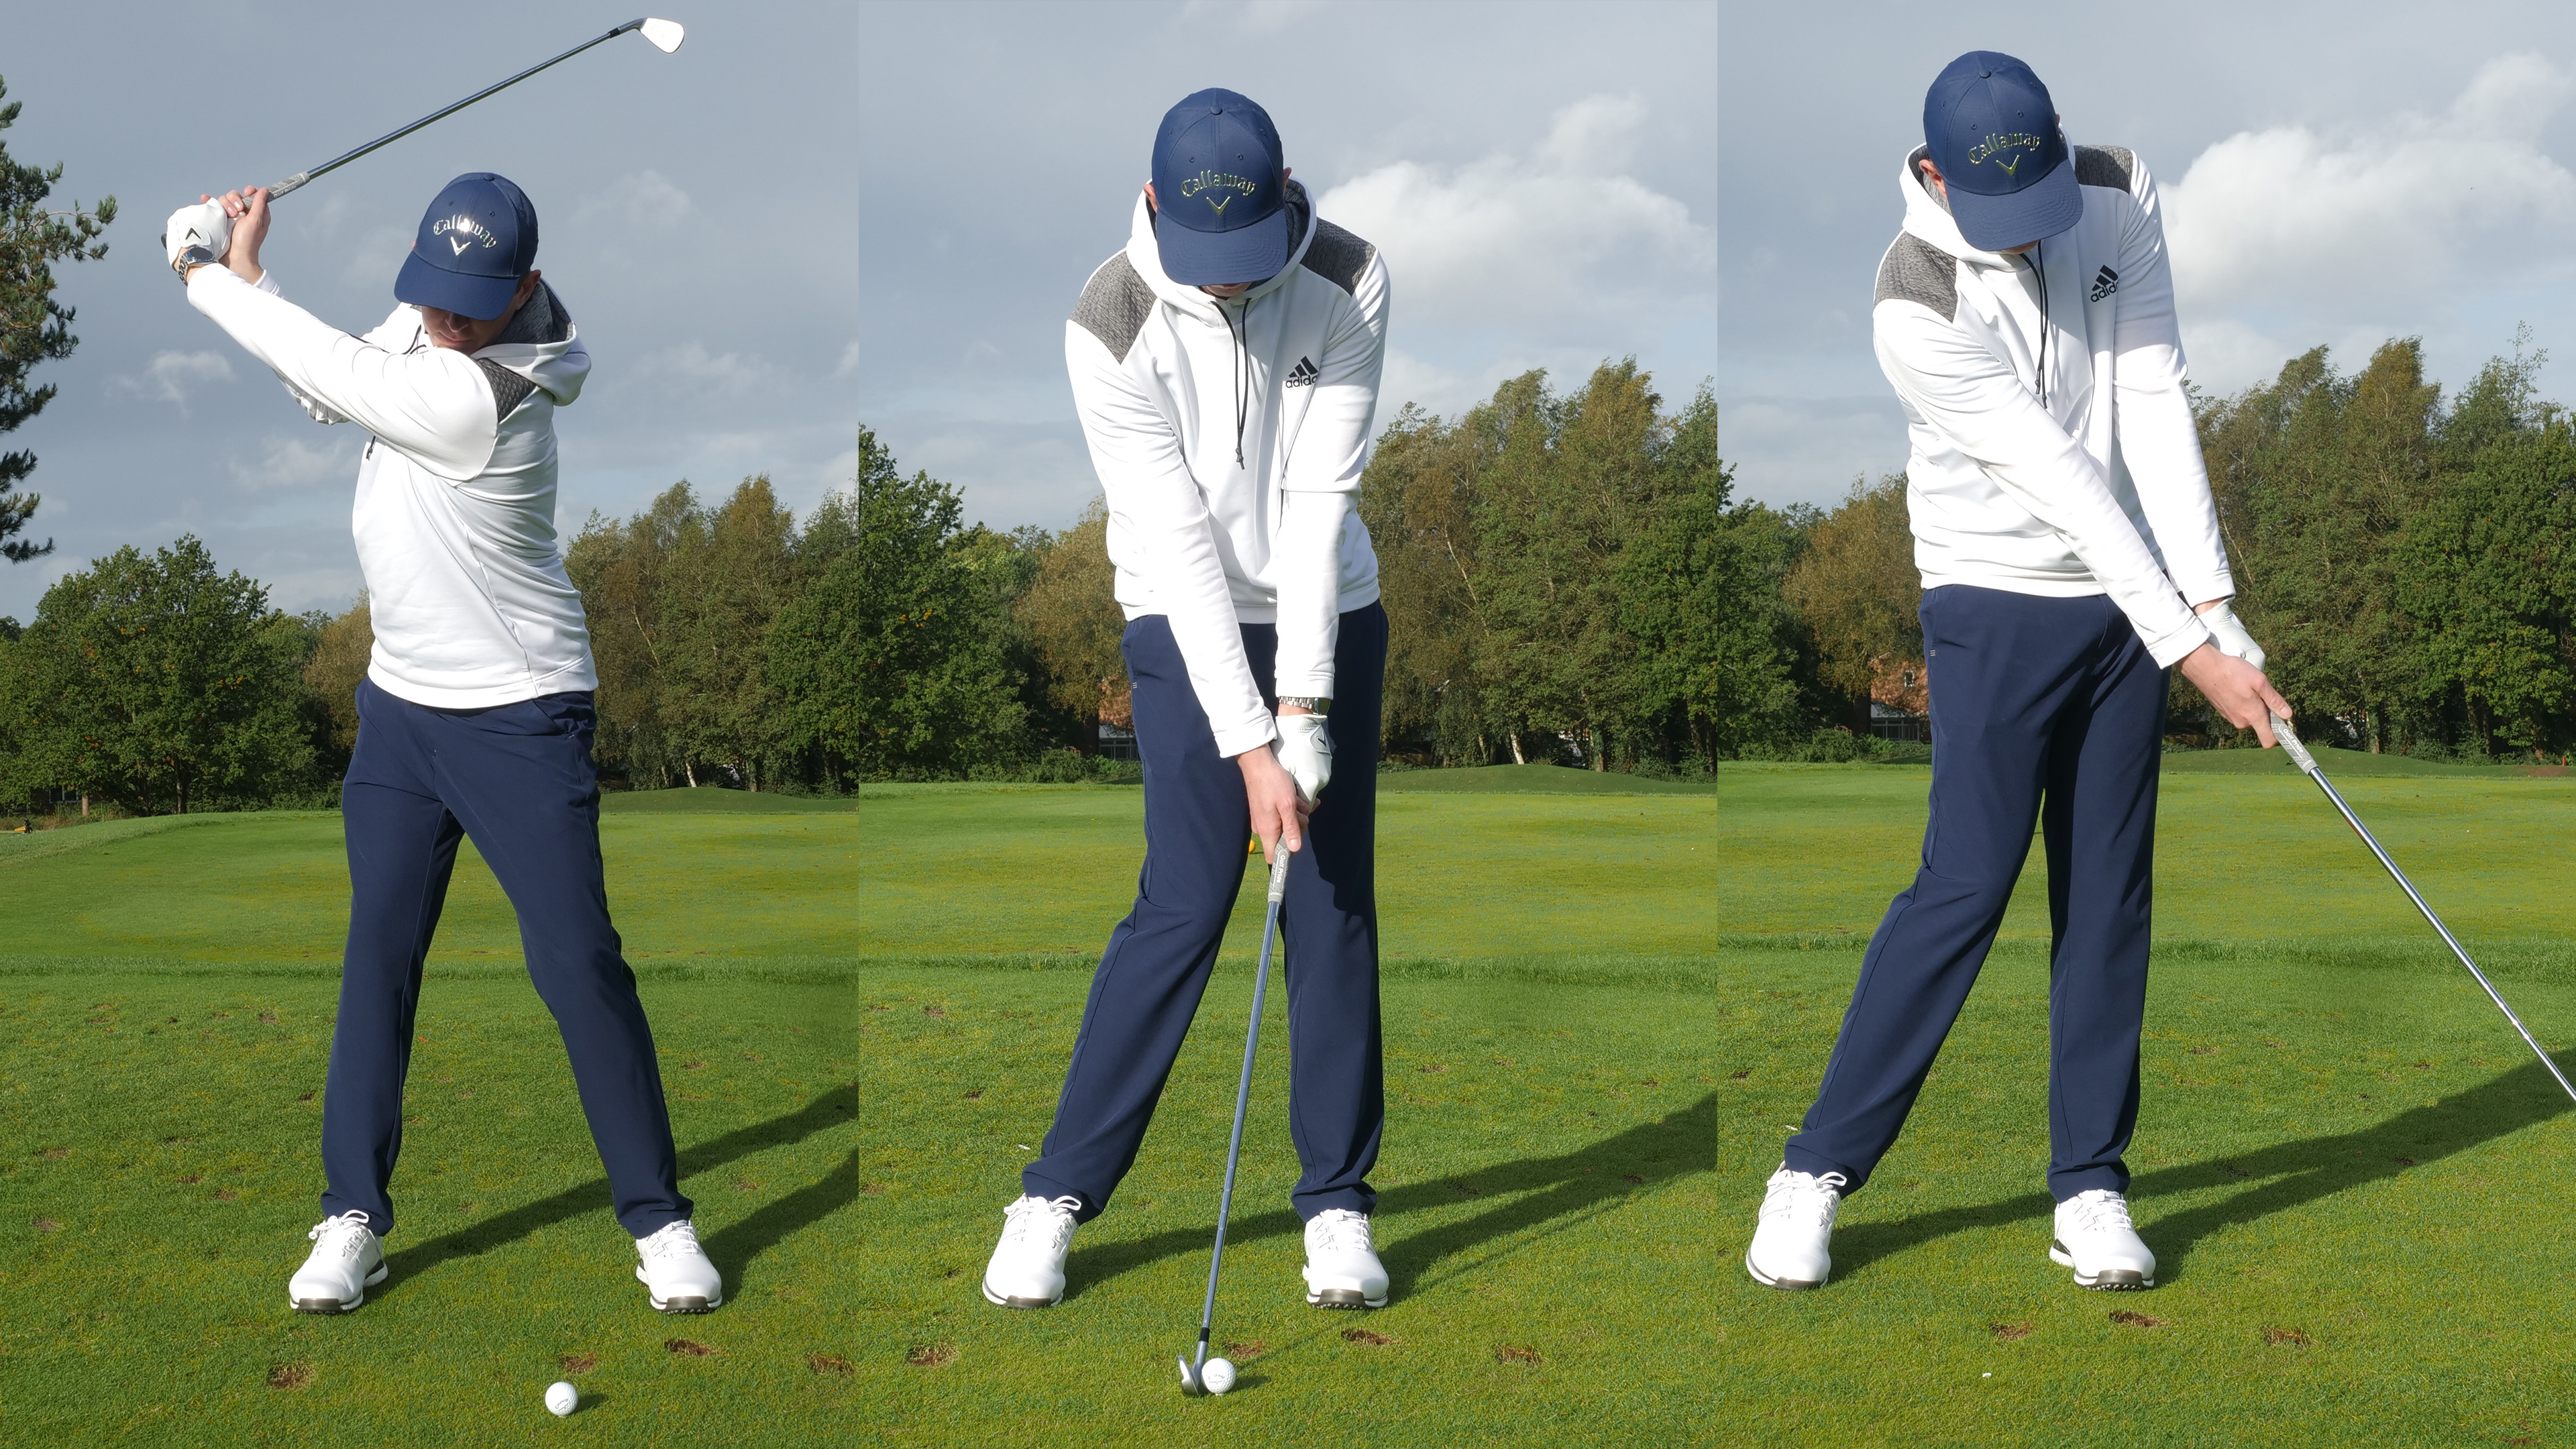 How practicing in slow-motion can help improve your swing